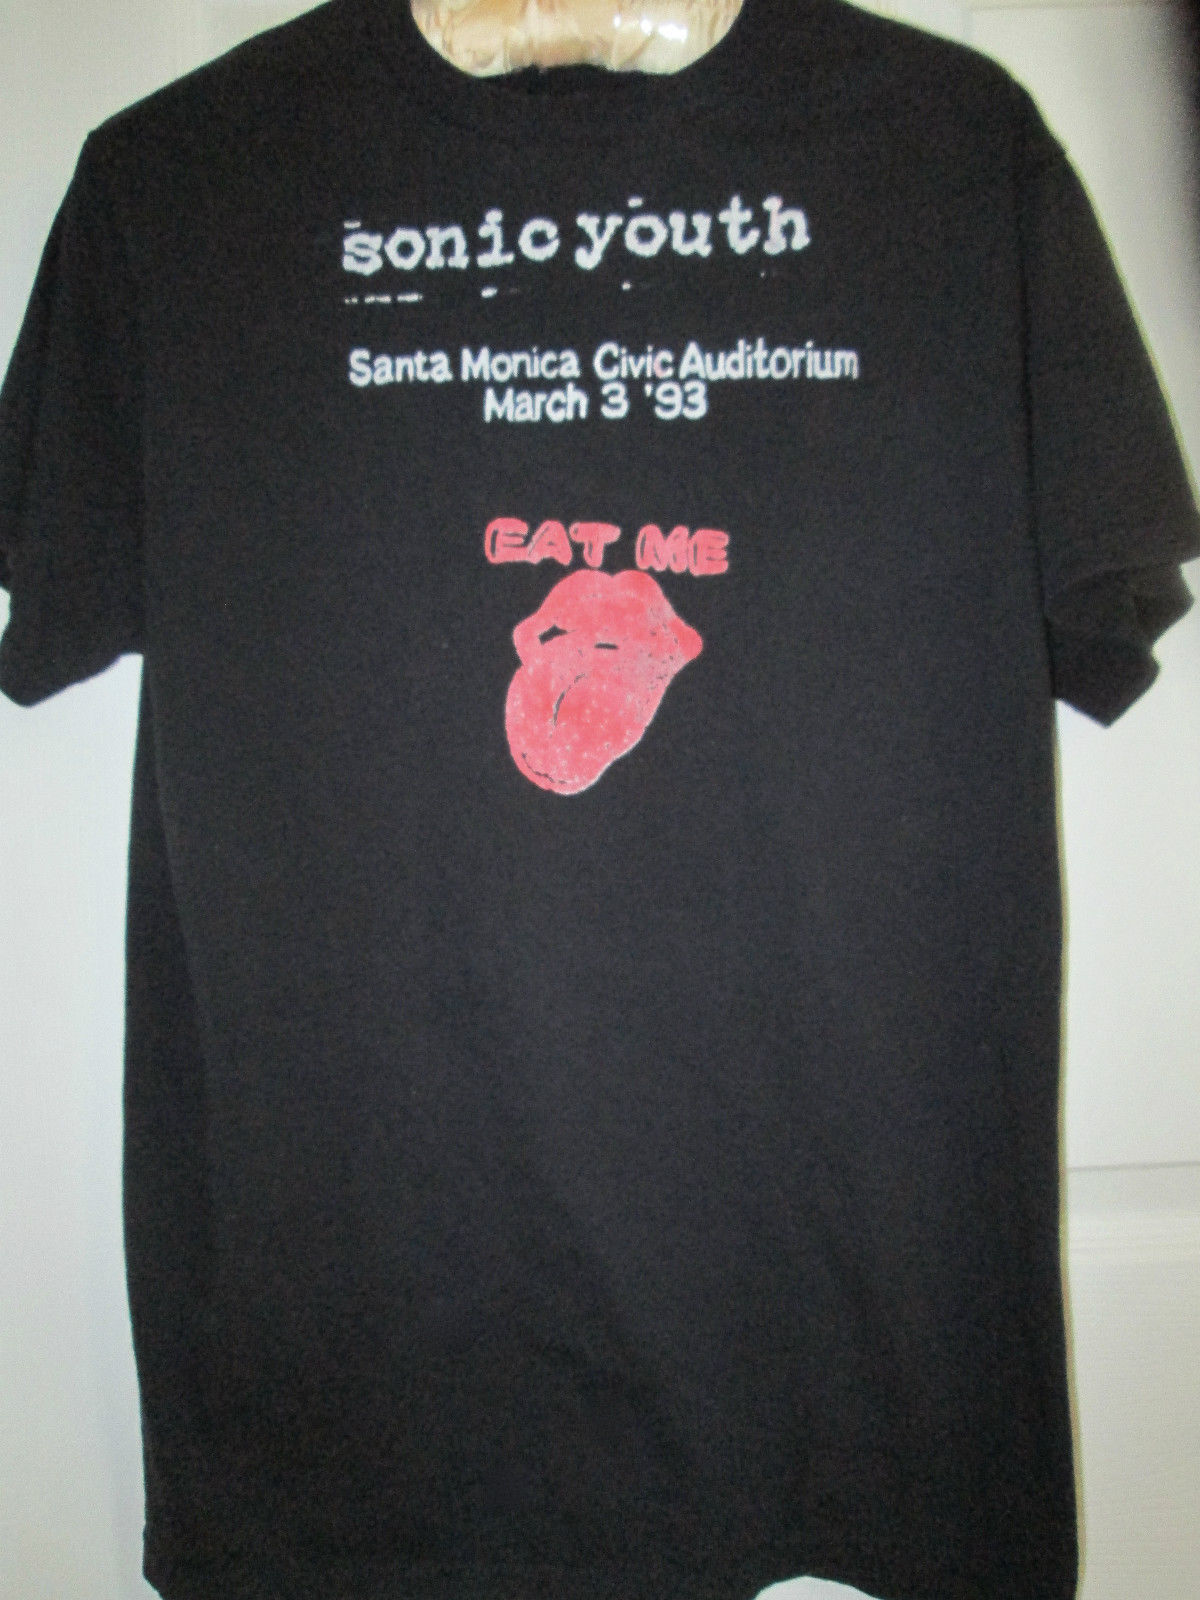 Pre-owned Vintage 1993 Sonic Youth T-Shirt (Santa Monica gig) Design